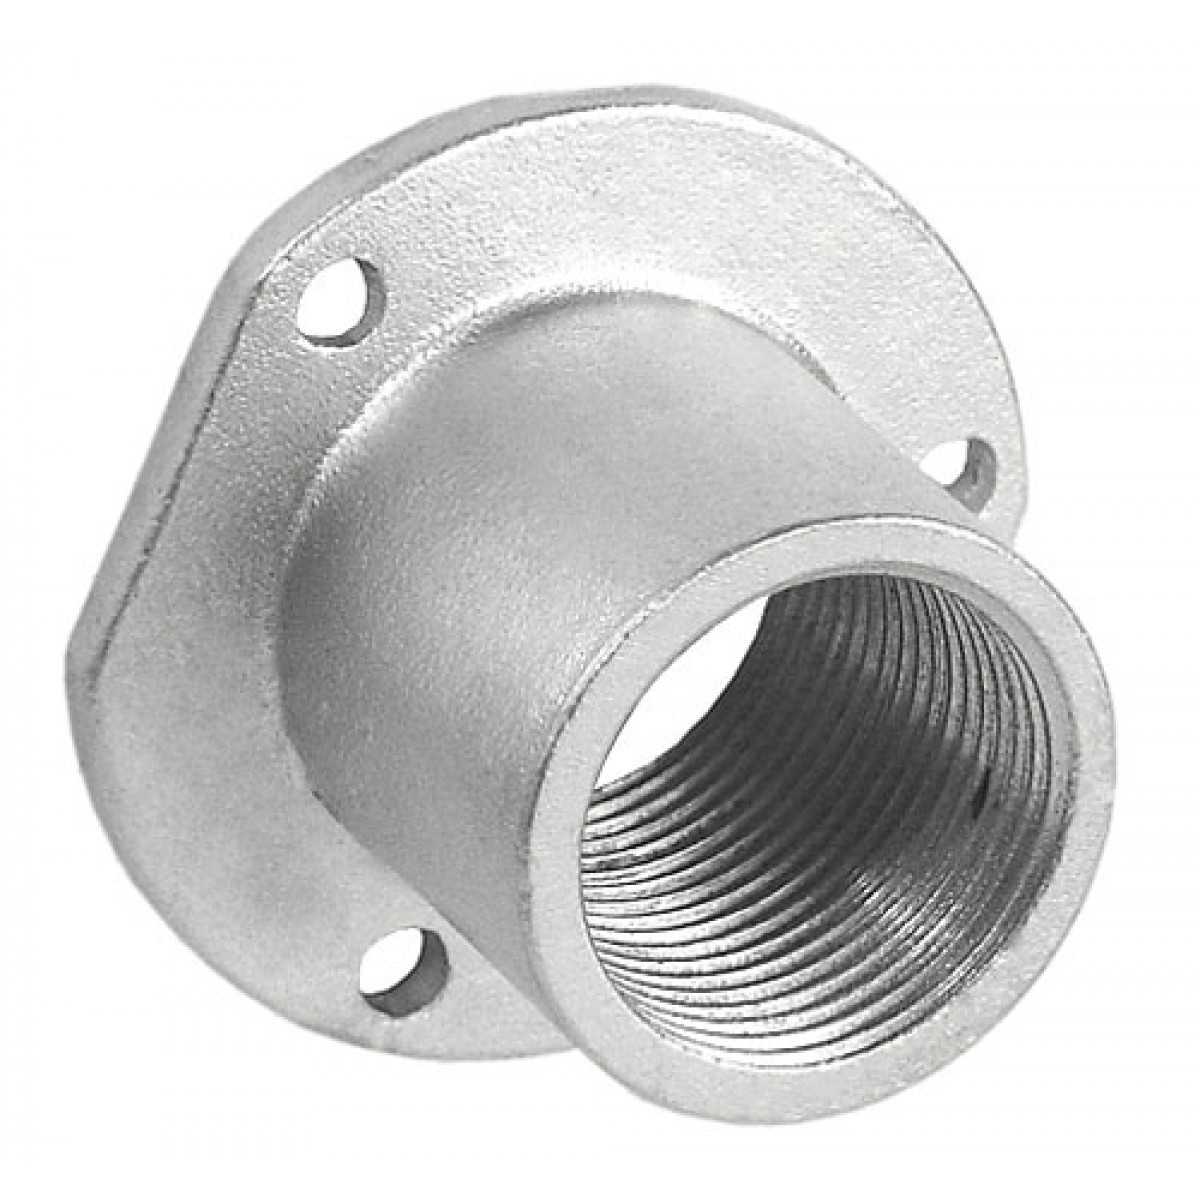 1 Pc, 3/4 In. Straight Concrete Form Pipe Insert, Zinc Plated Malleable Iron Used to Make Walls, Floors & Ceilings In Poured Concrete Structures